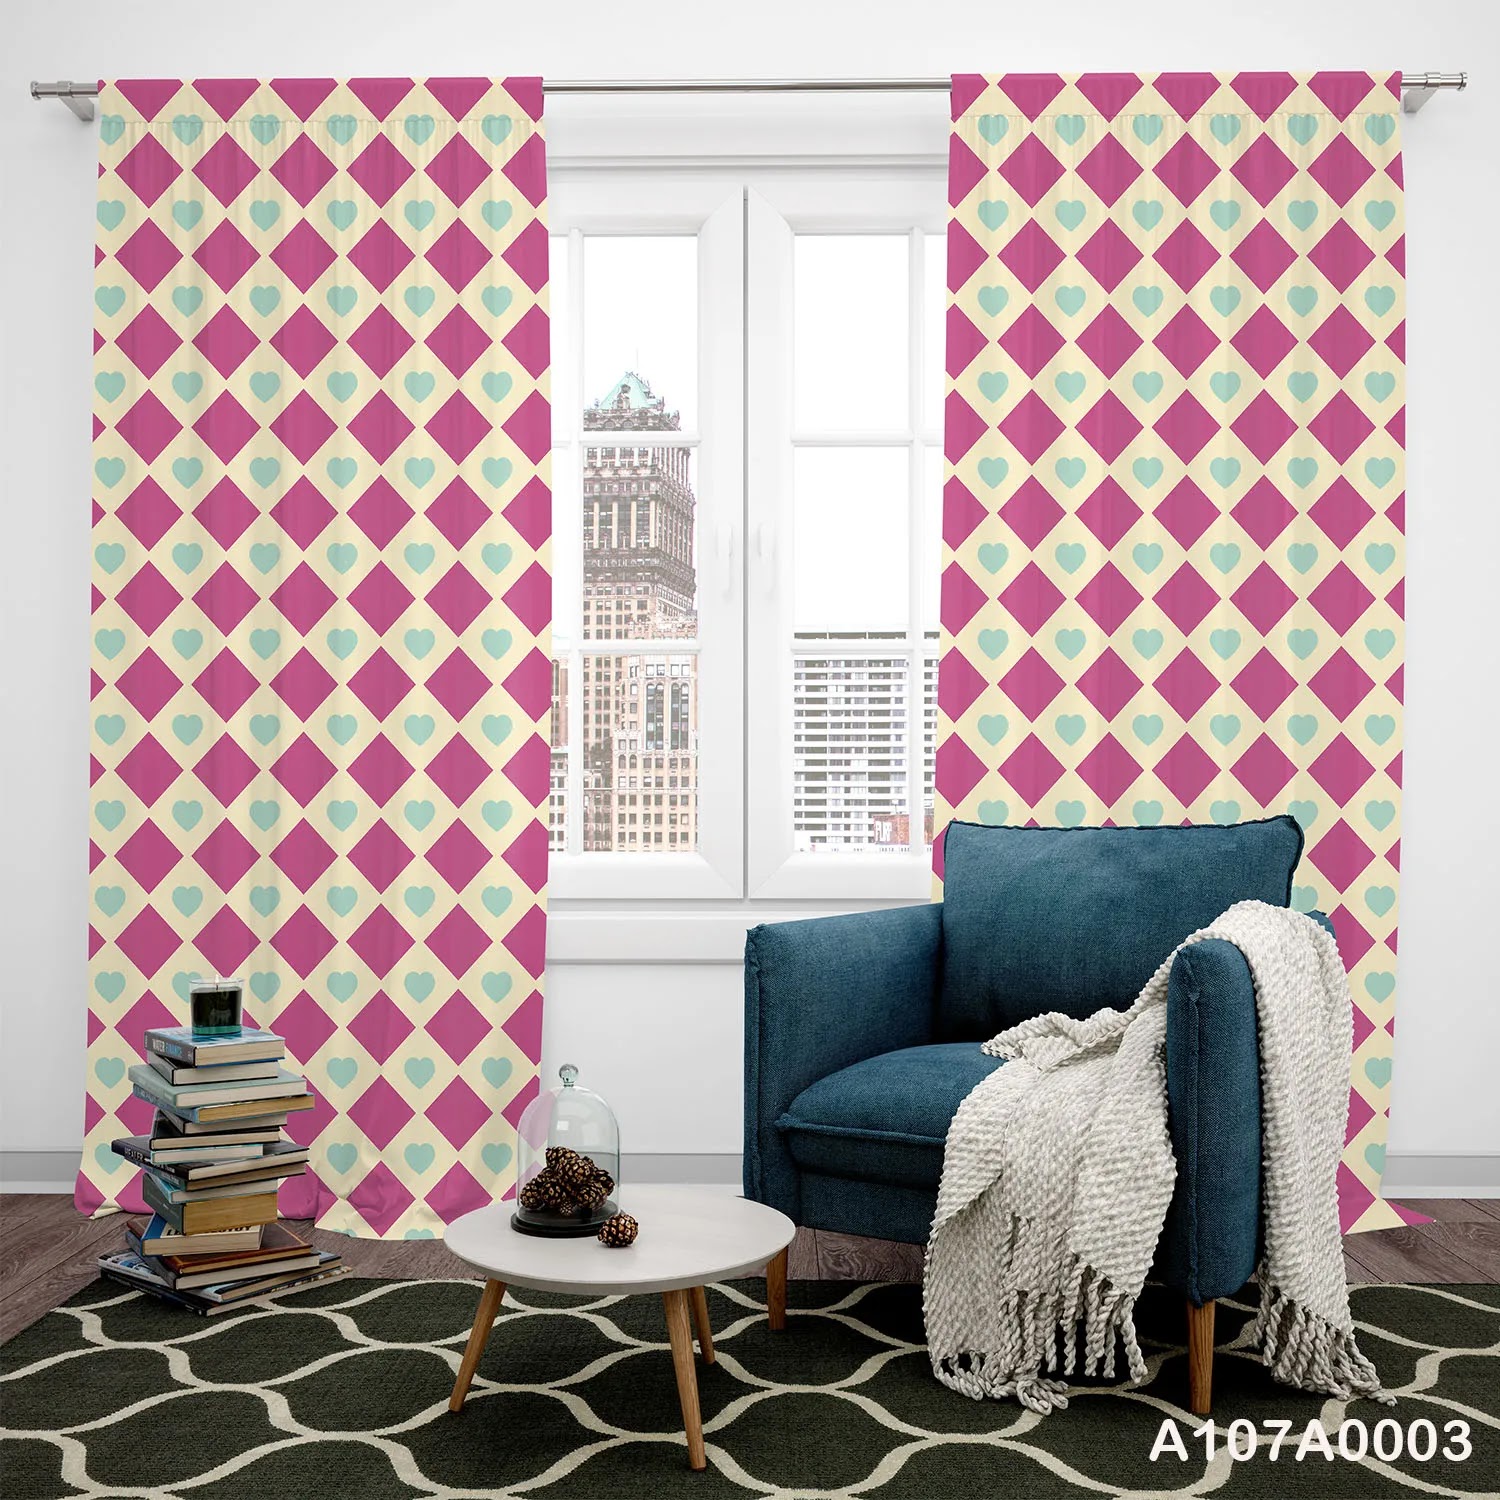 Curtains in Pink, white and green color of geometric forms